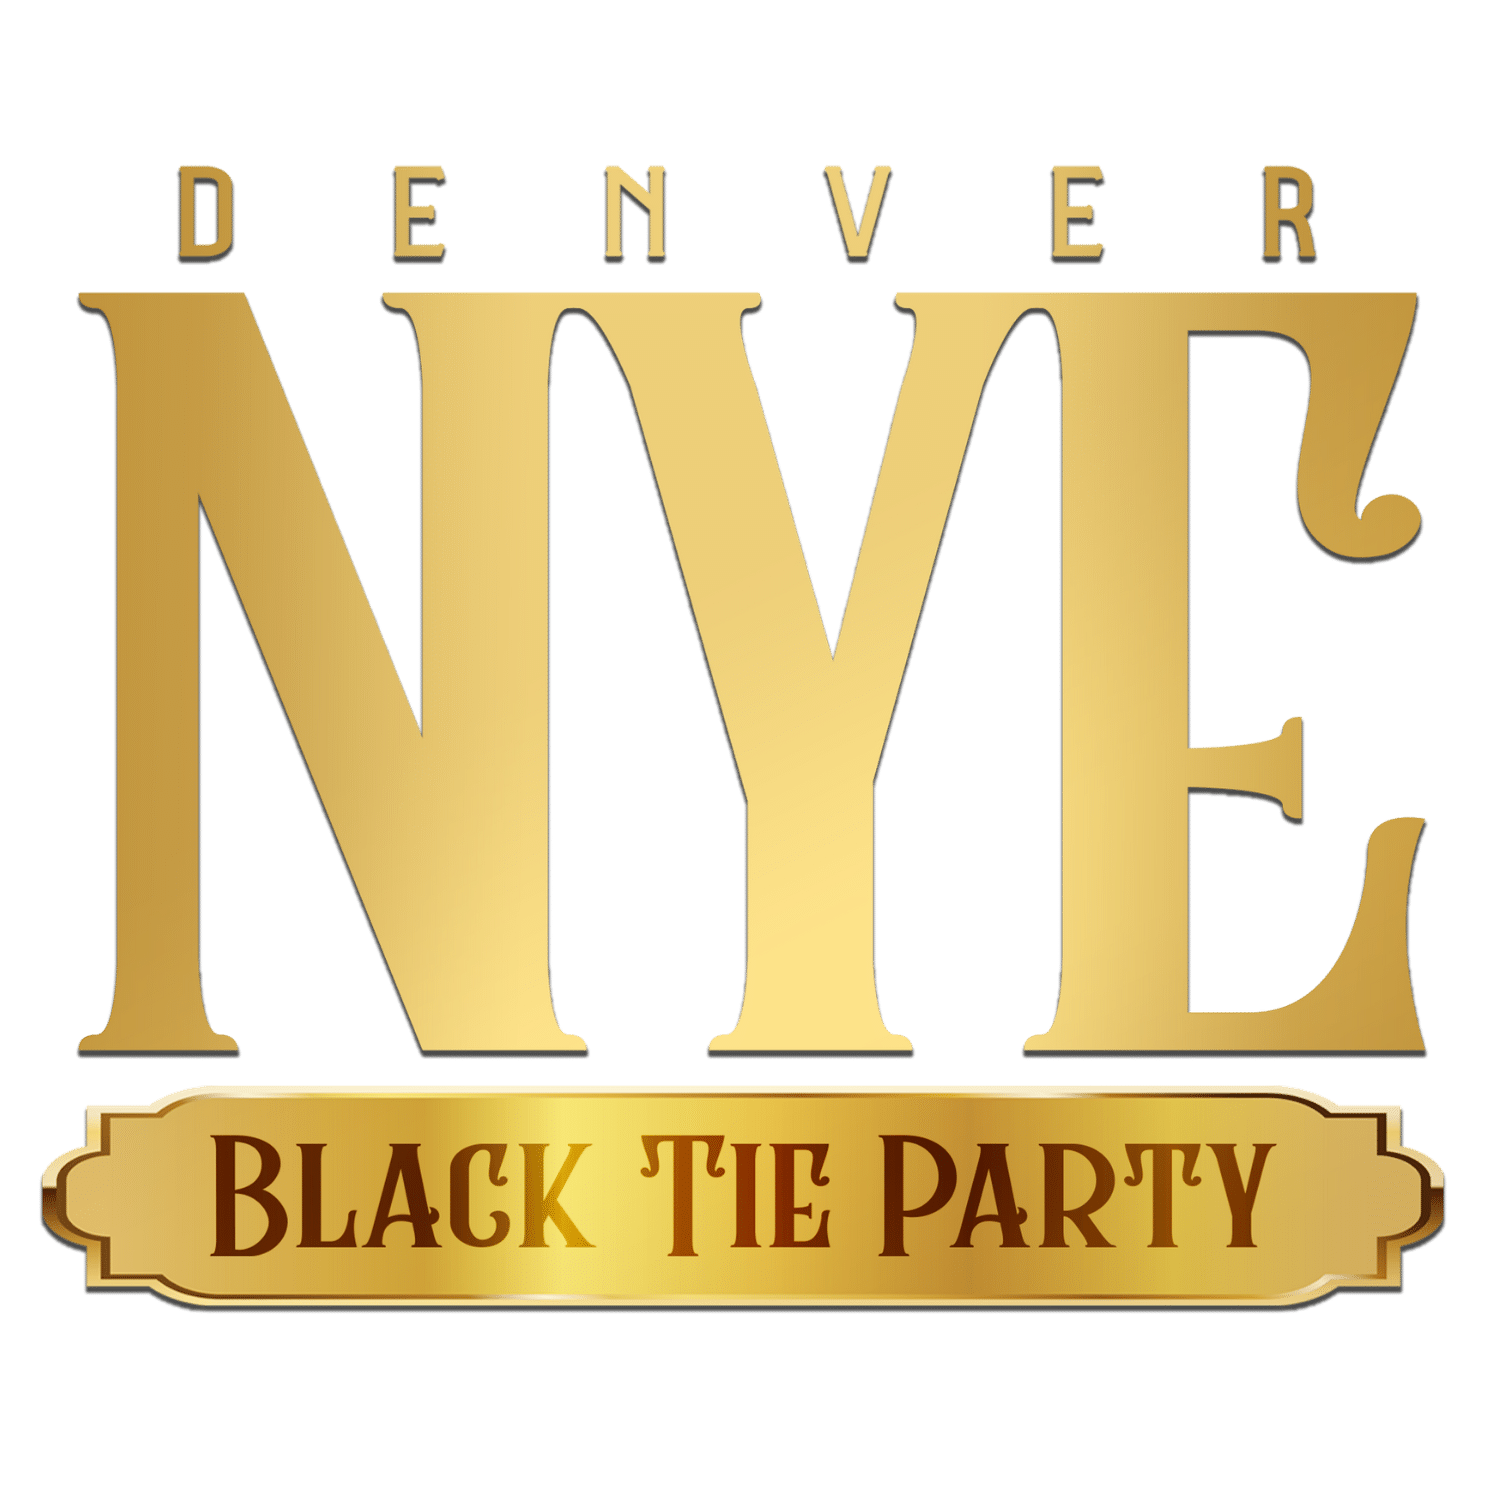 New Years Eve Denver | Denver New Years Eve Black Tie Party 2023 - 2024